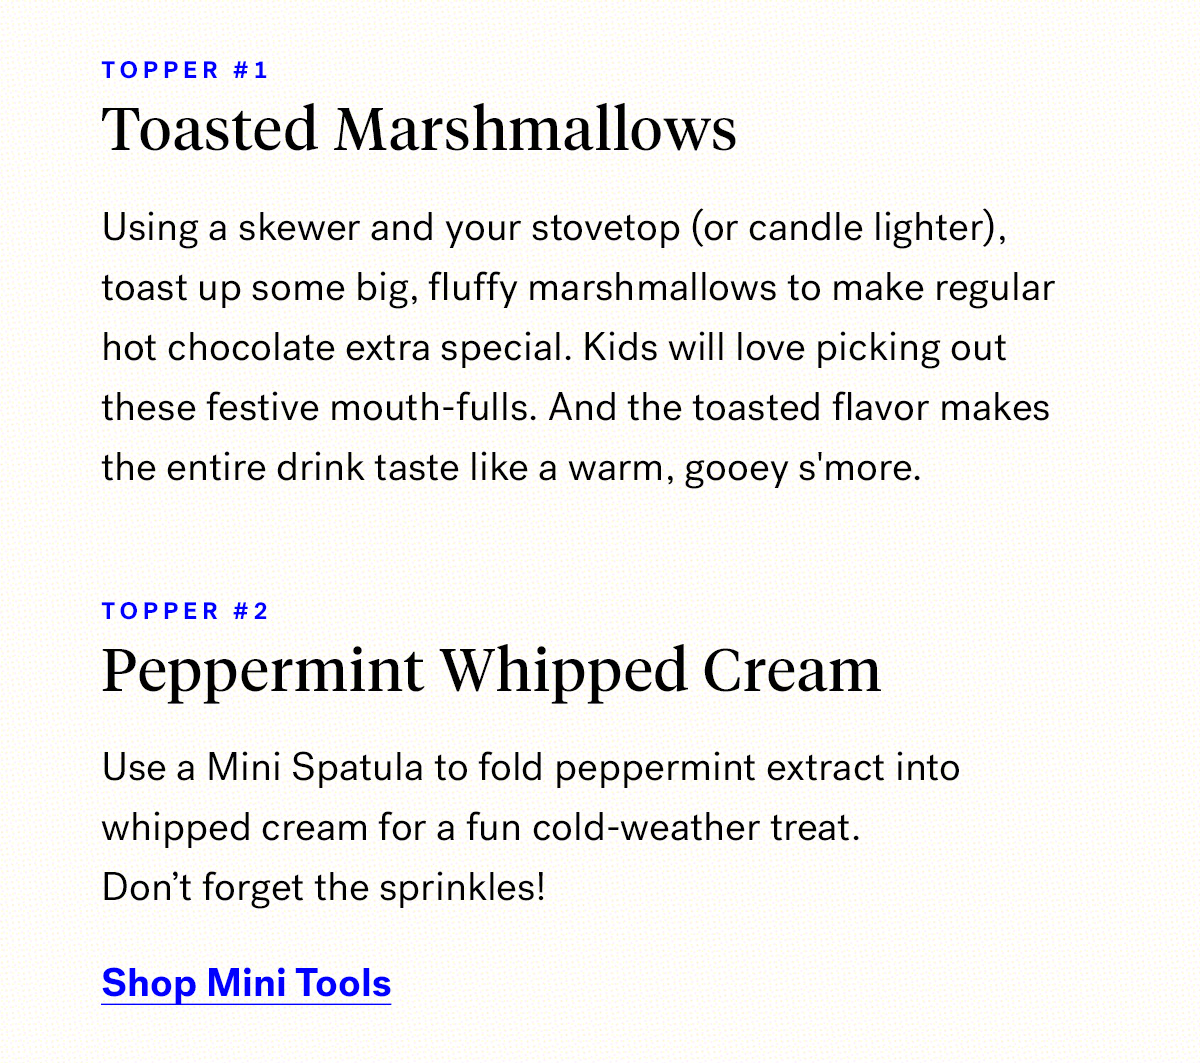       
                                Topper #1 
                                Toasted marshmallows

                                Using a skewer and your stovetop (or candle lighter), toast up some big, fluffy marshmallows to make regular hot chocolate extra special. 
                                Kids will love picking out these festive mouth-fulls. And the toasted flavor makes the entire drink taste like a warm, gooey s''more. 
                           
                                Topper #2

                                Peppermint whipped cream
                                
                                Use a Mini Spatula to fold peppermint extract into whipped cream for a fun cold-weather treat. 
                                Don't forget the sprinkles!

                                Shop Mini Tools


                                